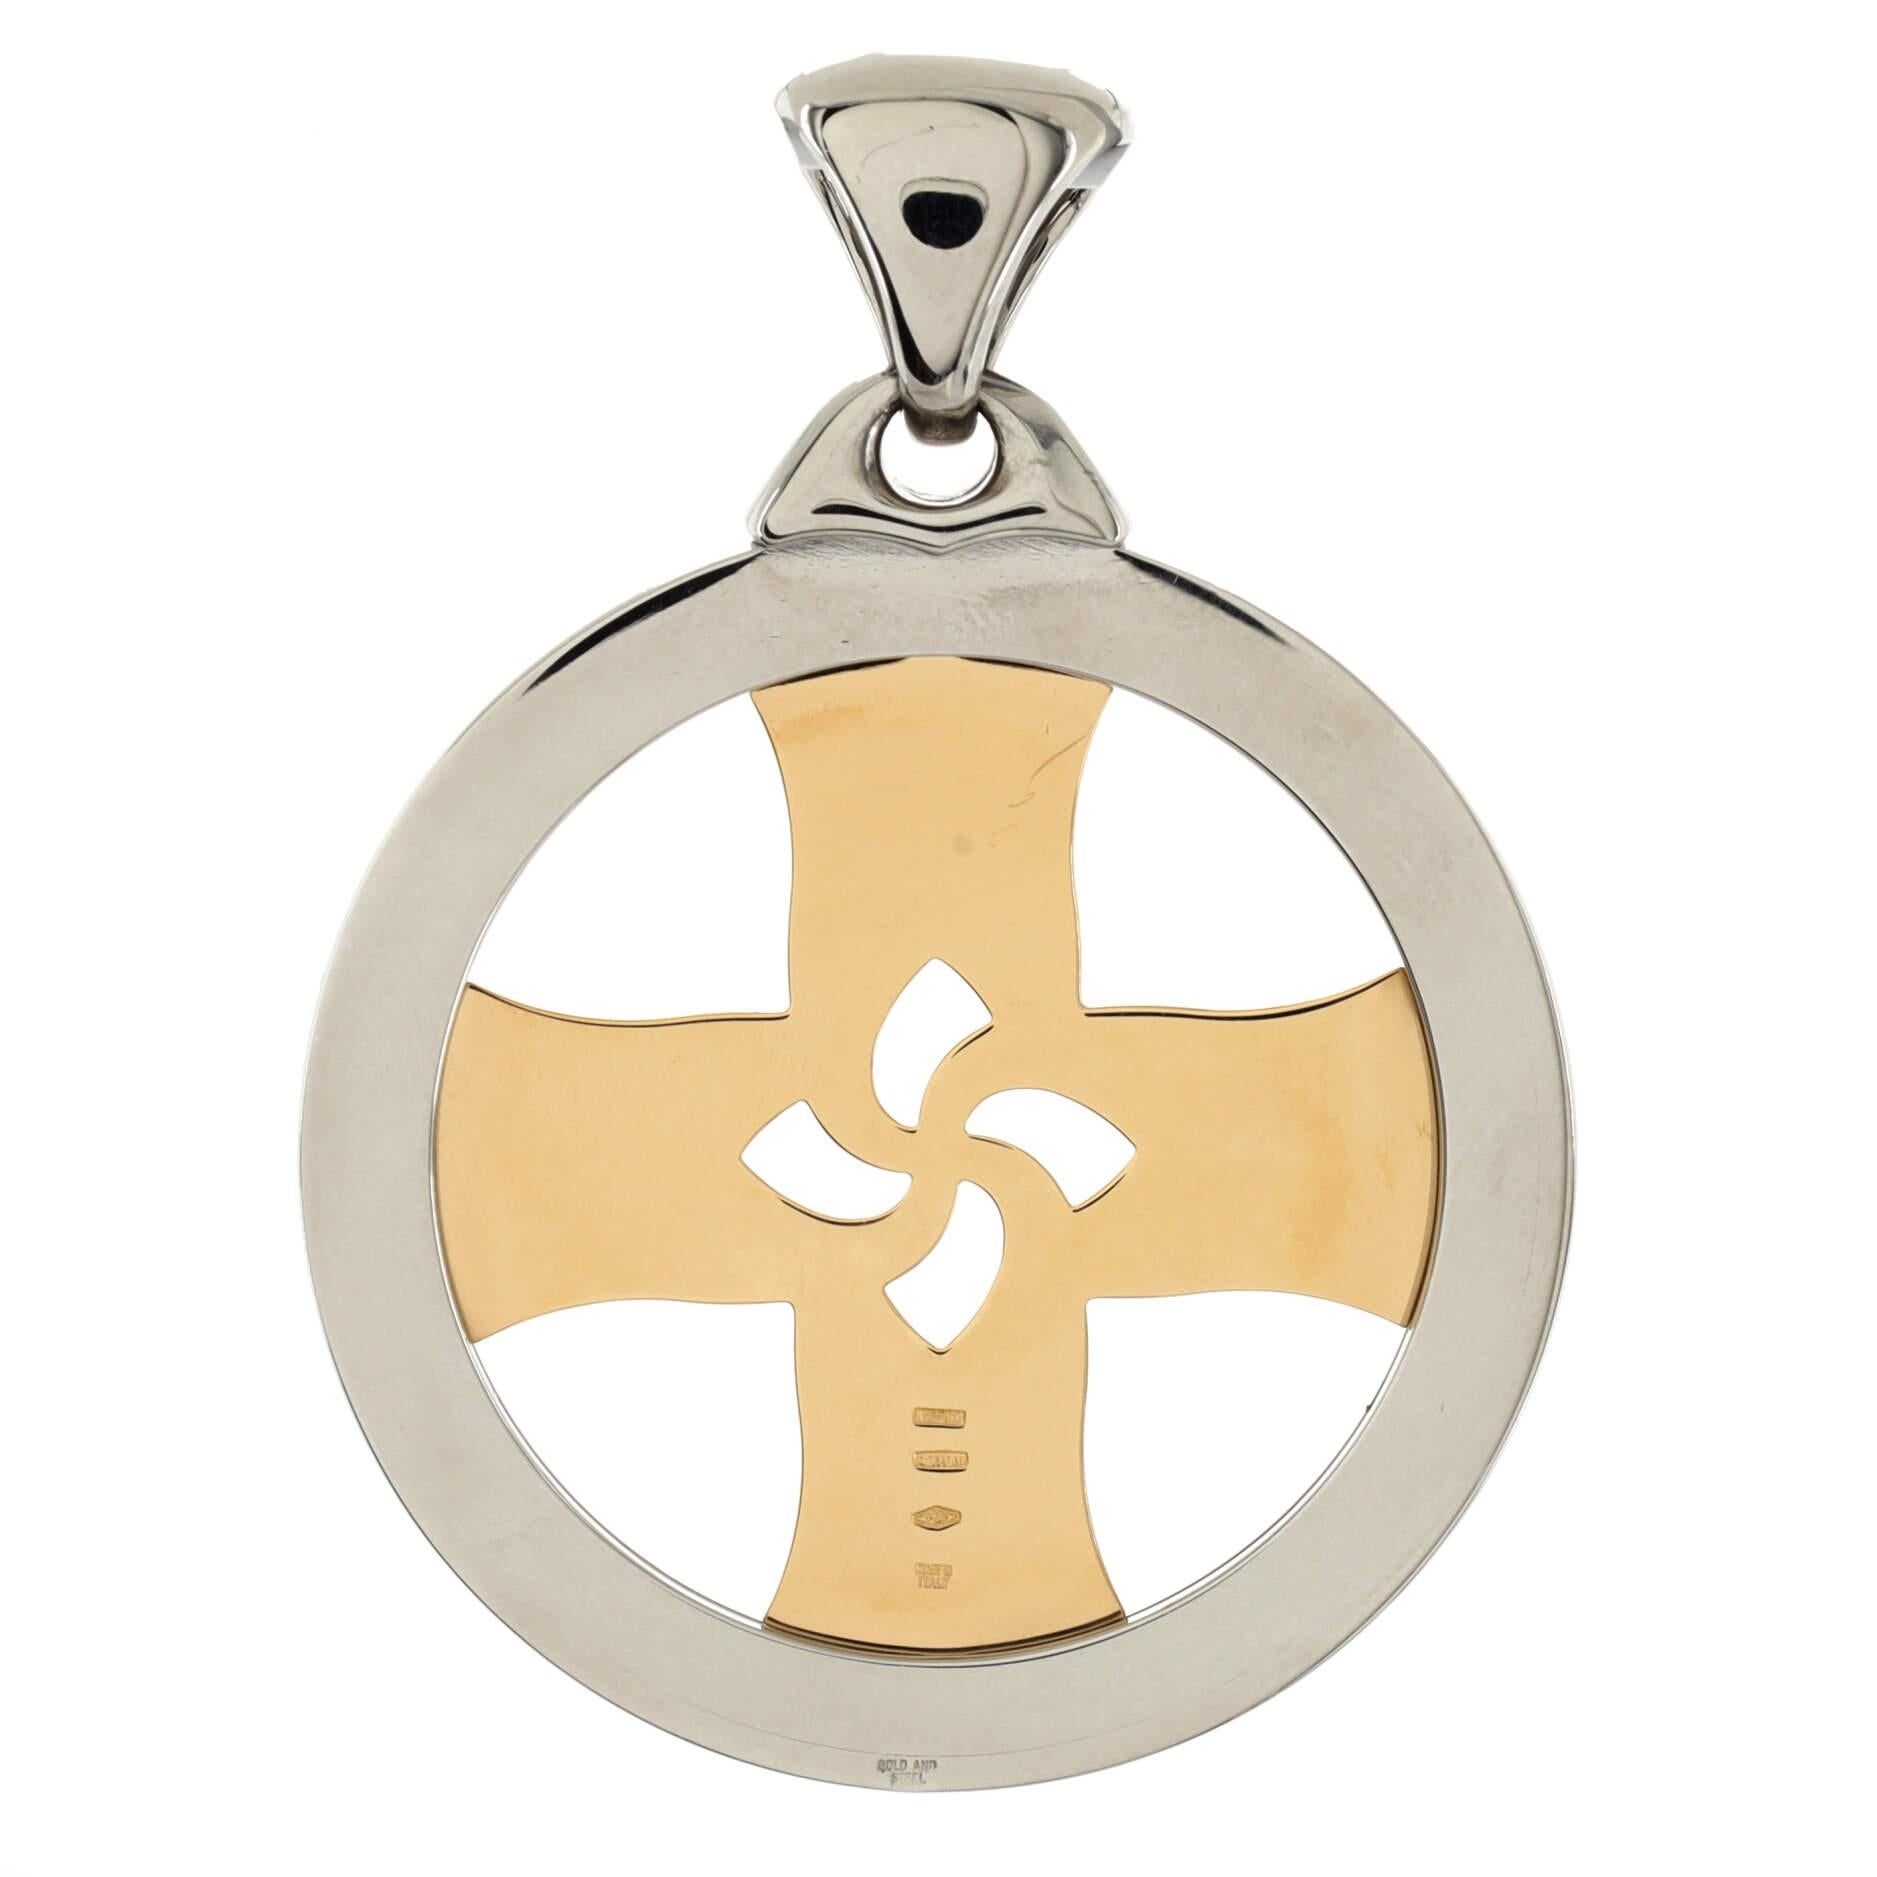 Condition: Great. Scratches throughout.
Accessories: No Accessories
Measurements: Width: 43 mm
Designer: Bvlgari
Model: Tondo Cross Pendant Pendant & Charms Stainless Steel with 18K Yellow Gold
Exterior Color: Silver
Item Number: 202545/20